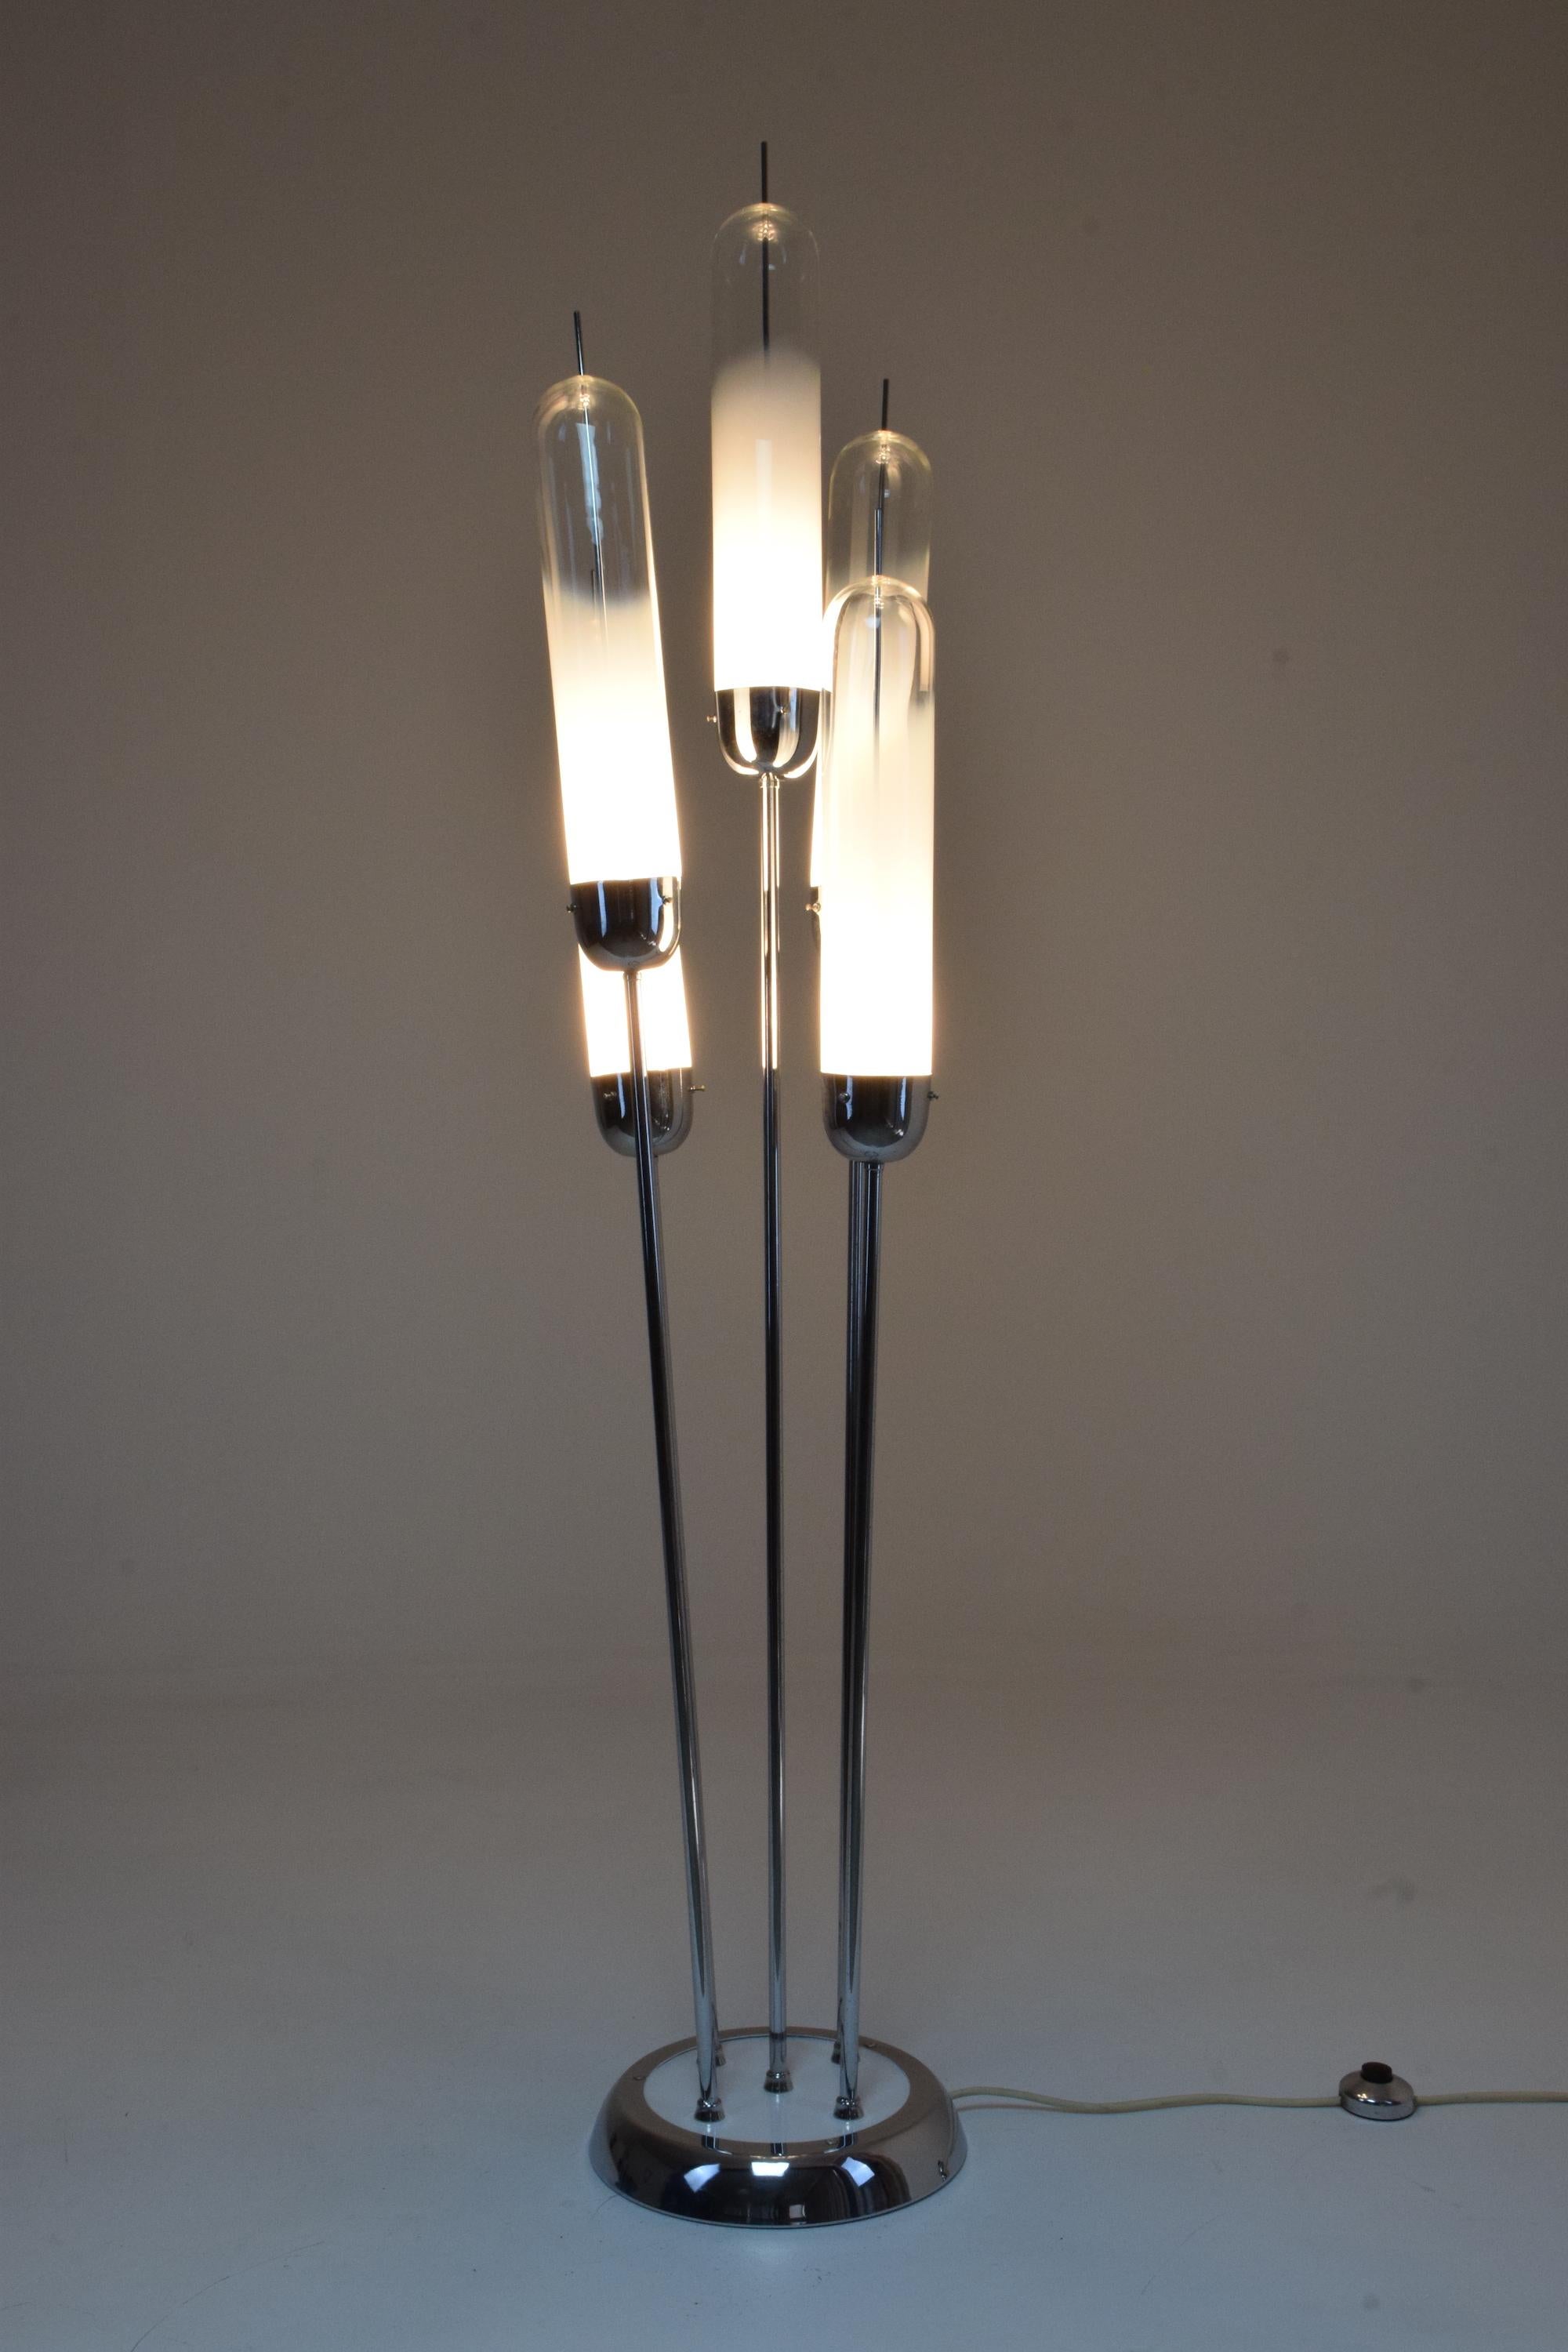 Stainless Steel 20th Century Floor Lamp in Murano Glass by Carlo Nason for Mazzega, 1970s For Sale